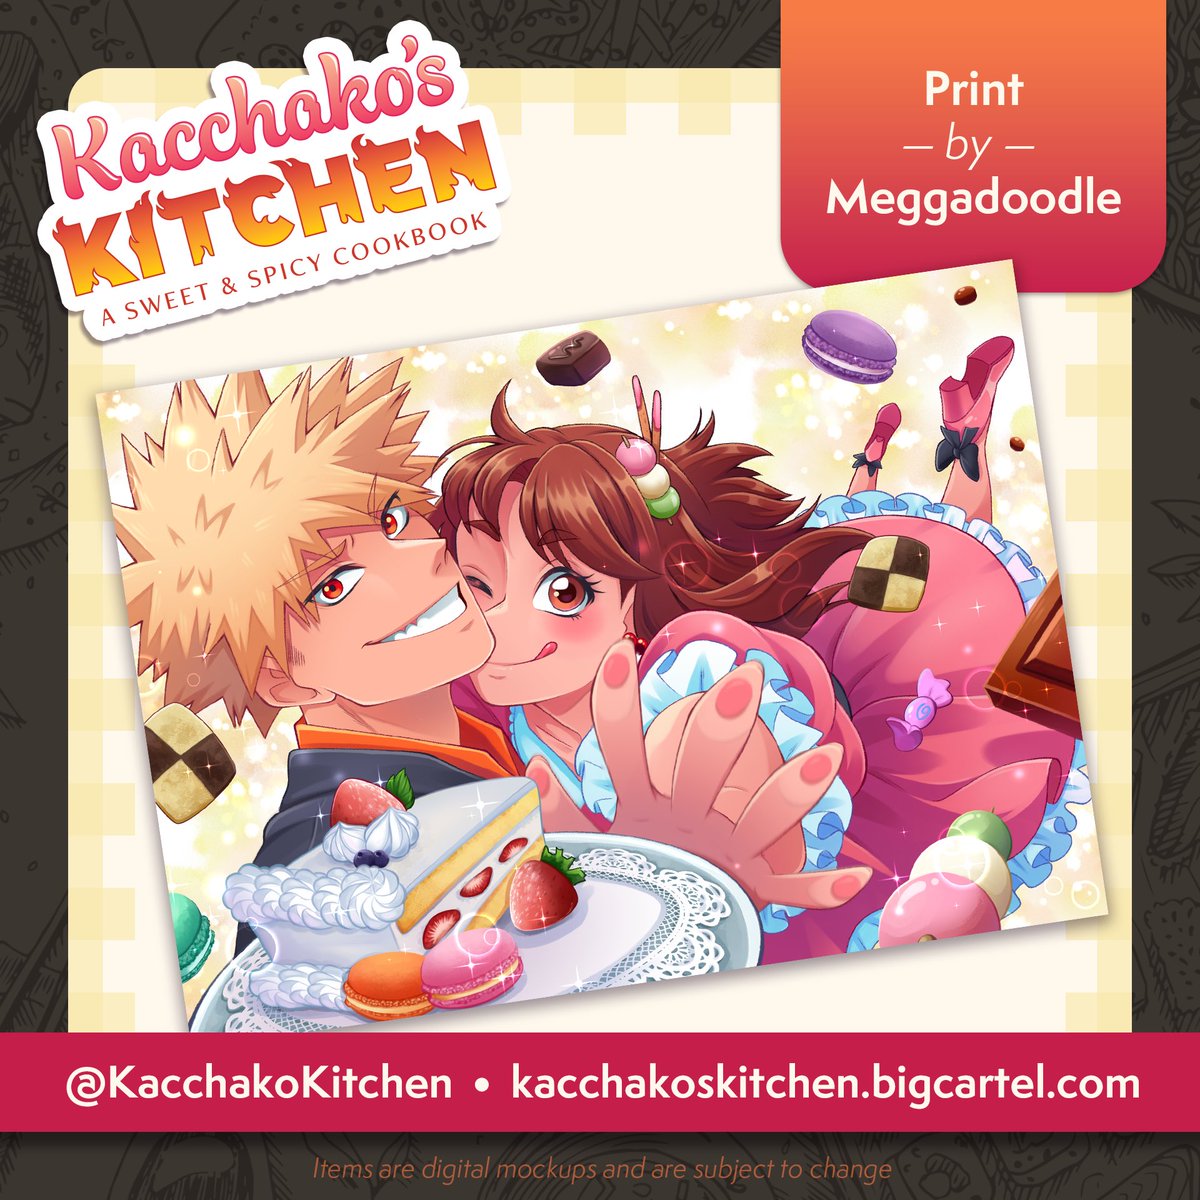 🍥 MERCH SPOTLIGHT 🍡 Everyday is a sweet treat when we spend it with Kacchako! Get your daily fix of our favorite duo with our delicious print, designed by @Meggadoodle85. kacchakoskitchen.bigcartel.com